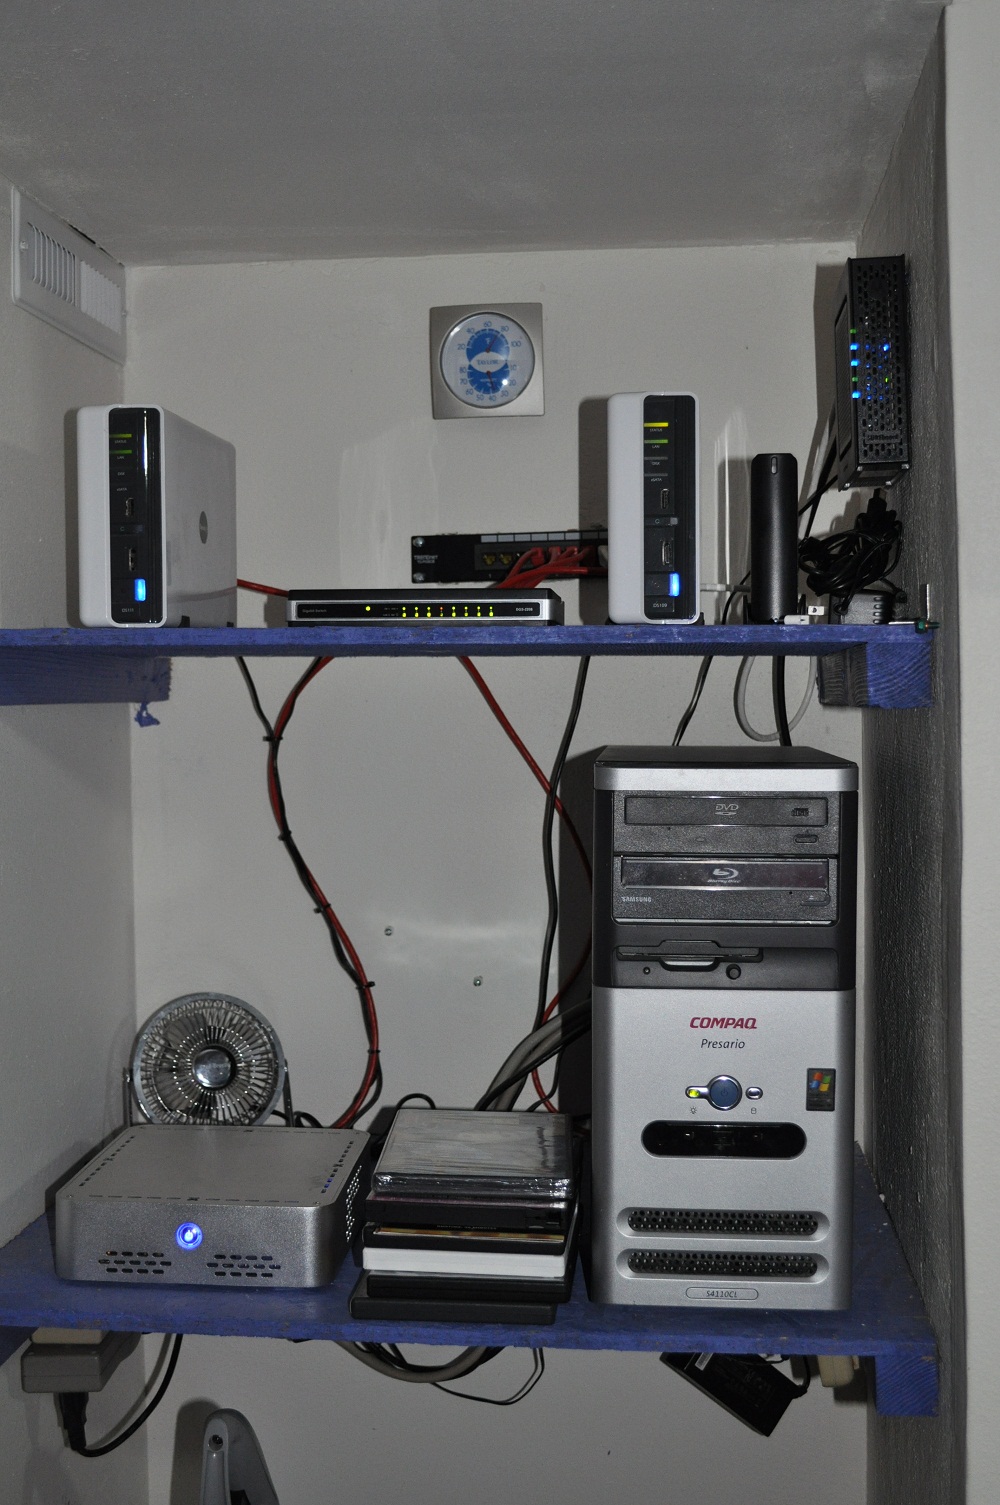 The low power home server in the network closet